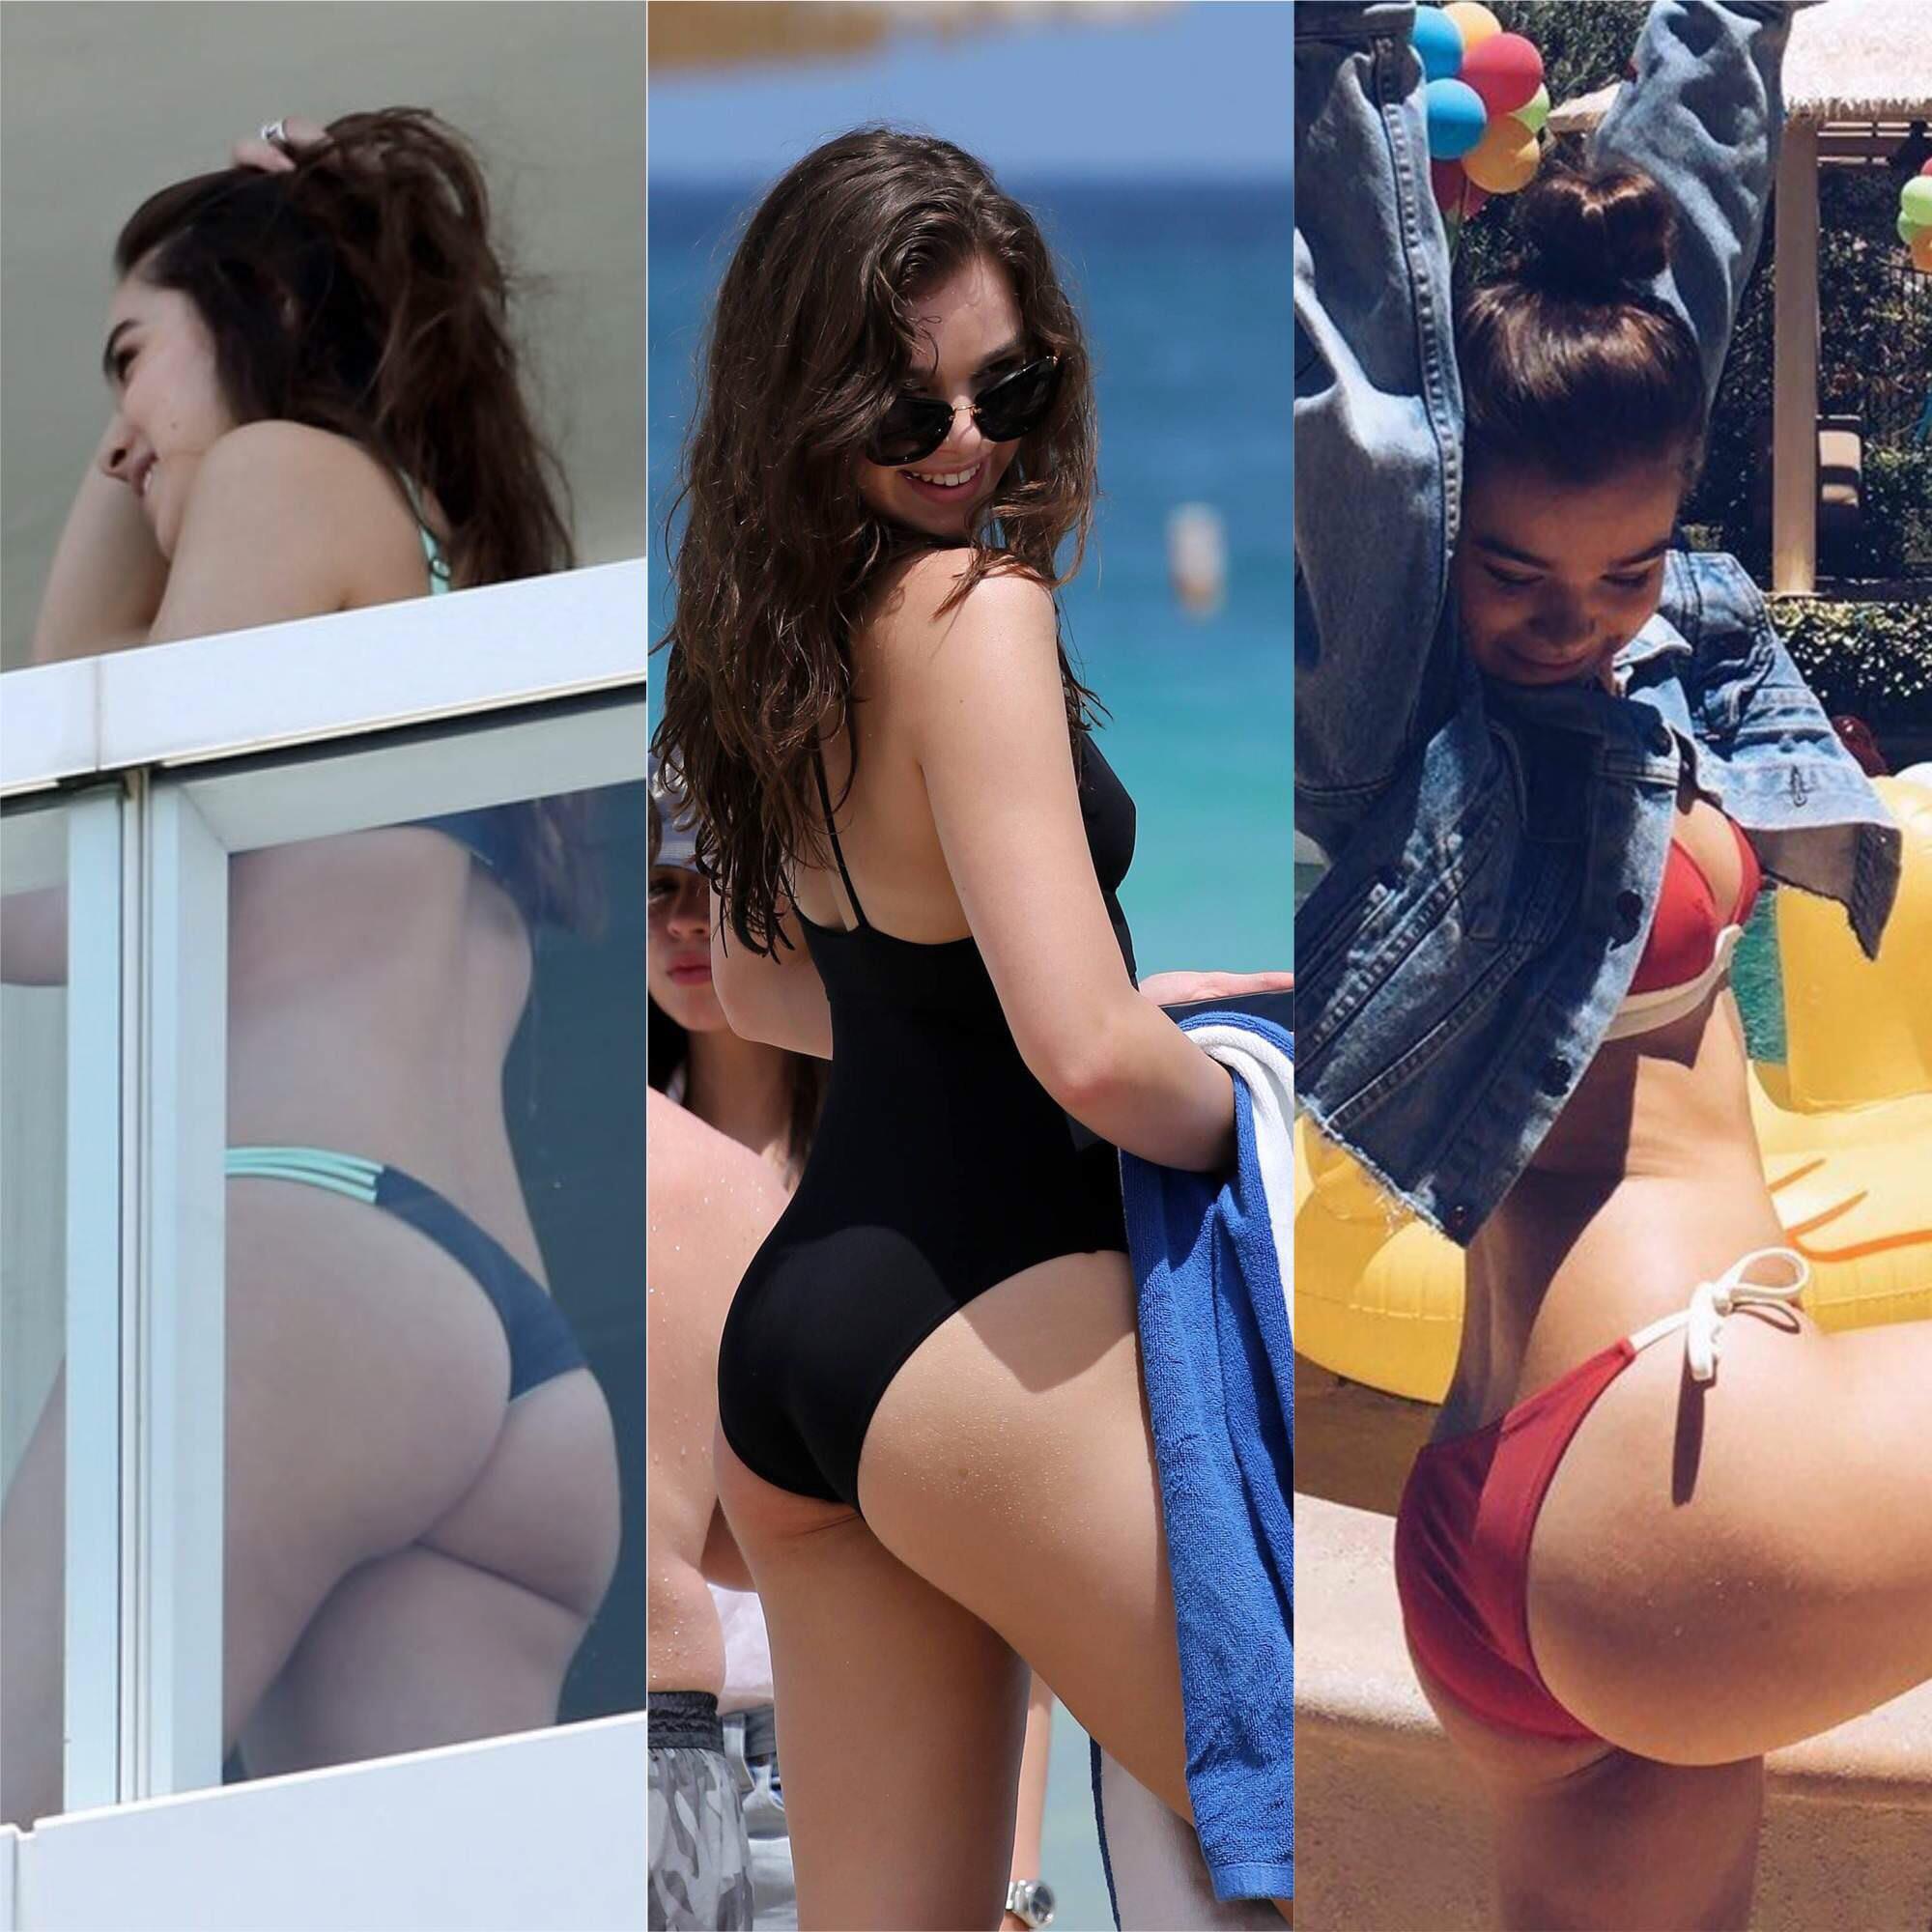 Hailee Steinfeld has the most squeezable asscheeks